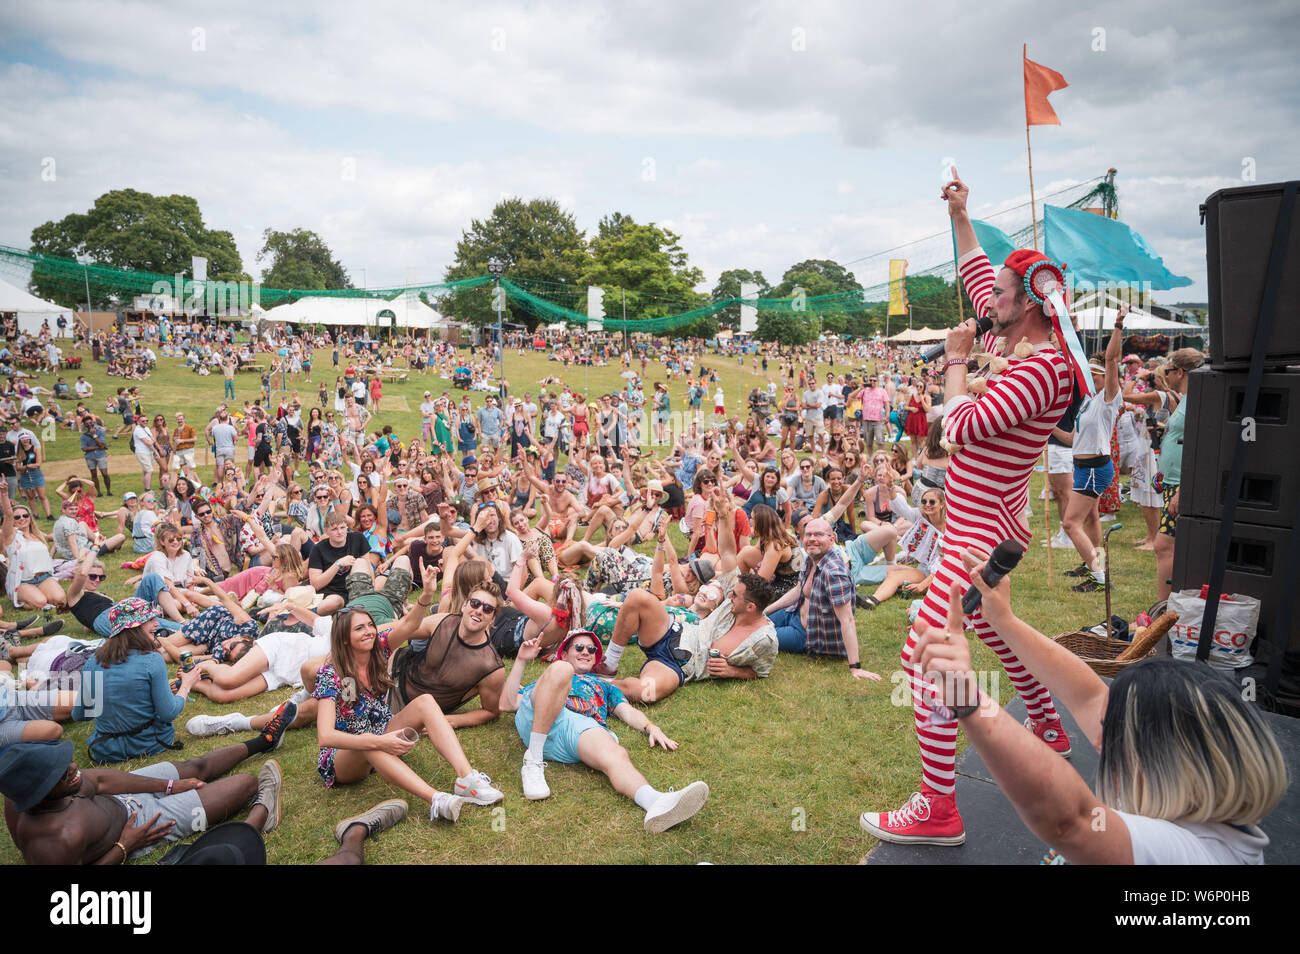 Cornbury Estate, Oxfordshire, UK. Friday 2nd August 2019. Wilderness Festival, Oxfordshire, UK.  Revellers enjoying the sun as Wilderness gets into full swing. Now in its 9th year, the festival is a celebration of art, music, fashion and culture on Cornbury Estate near Chipping Norton. Picture: Andrew Walmsley/Alamy Live News Stock Photo